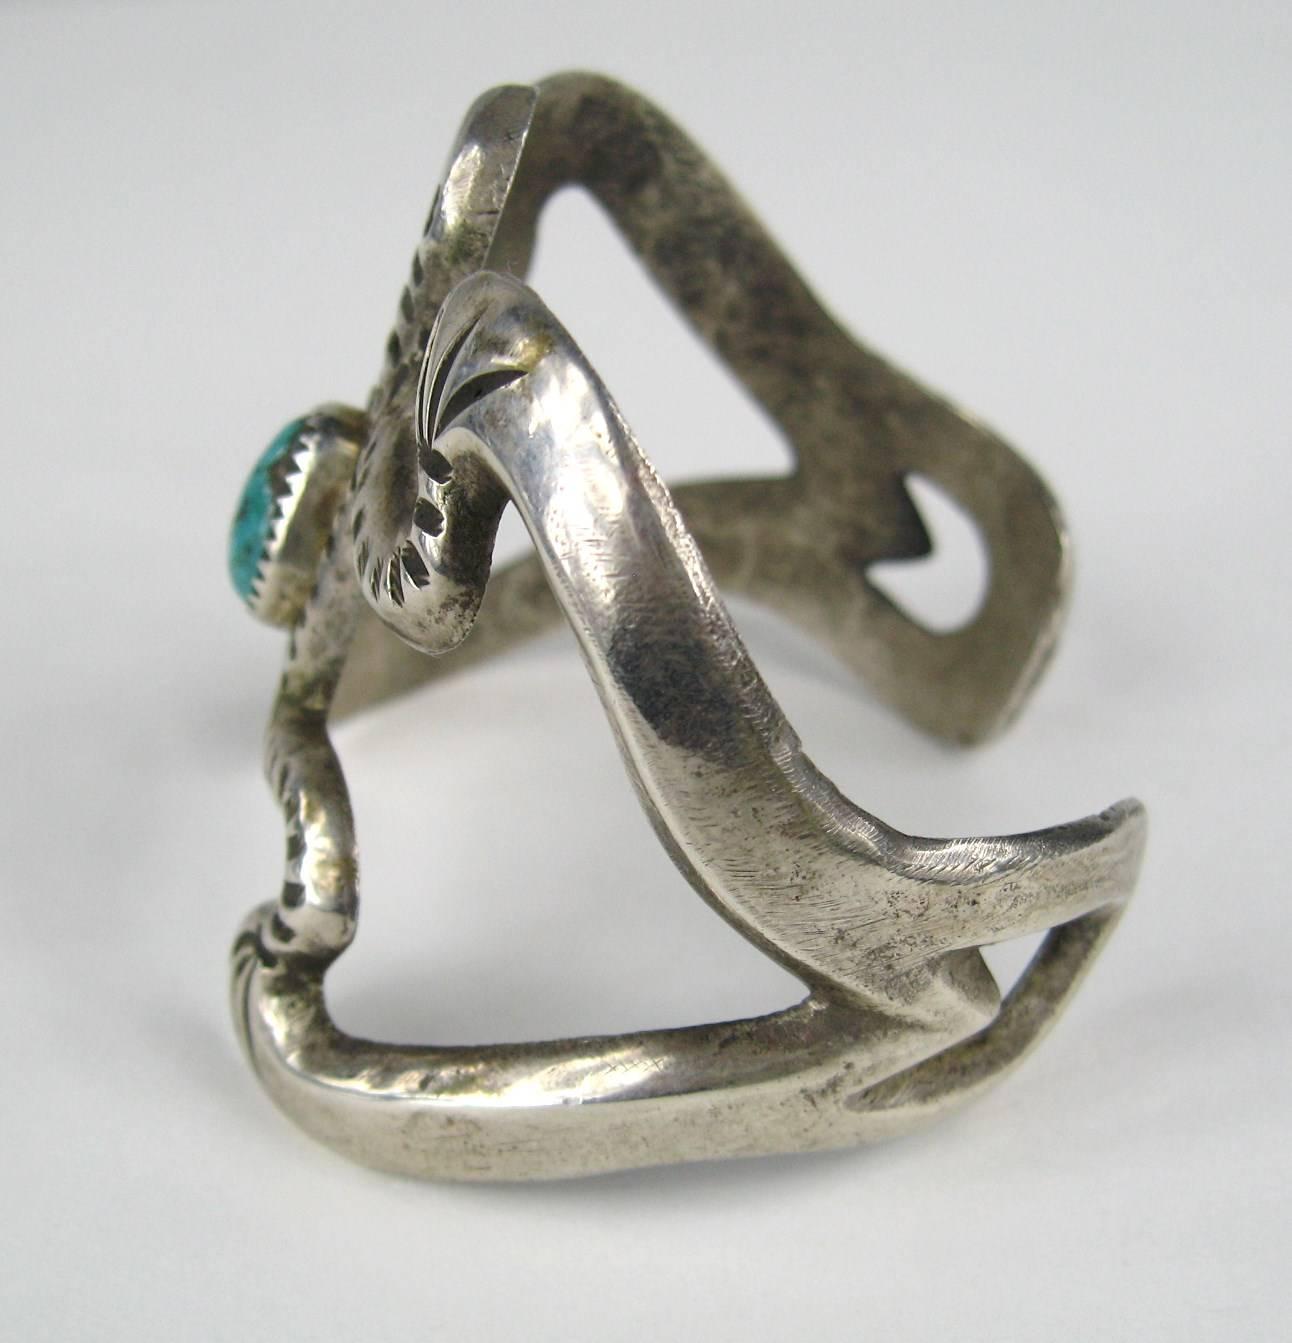 Navajo Sterling Silver sand cast cuff bracelet. Frog Motif With Bezel Turquoise stone The bracelet is not signed as it is common for older pieces from the pre 1950 era. it has a great patina. Measures 2.06 in top to bottom . Opening is 1.07 in. Will